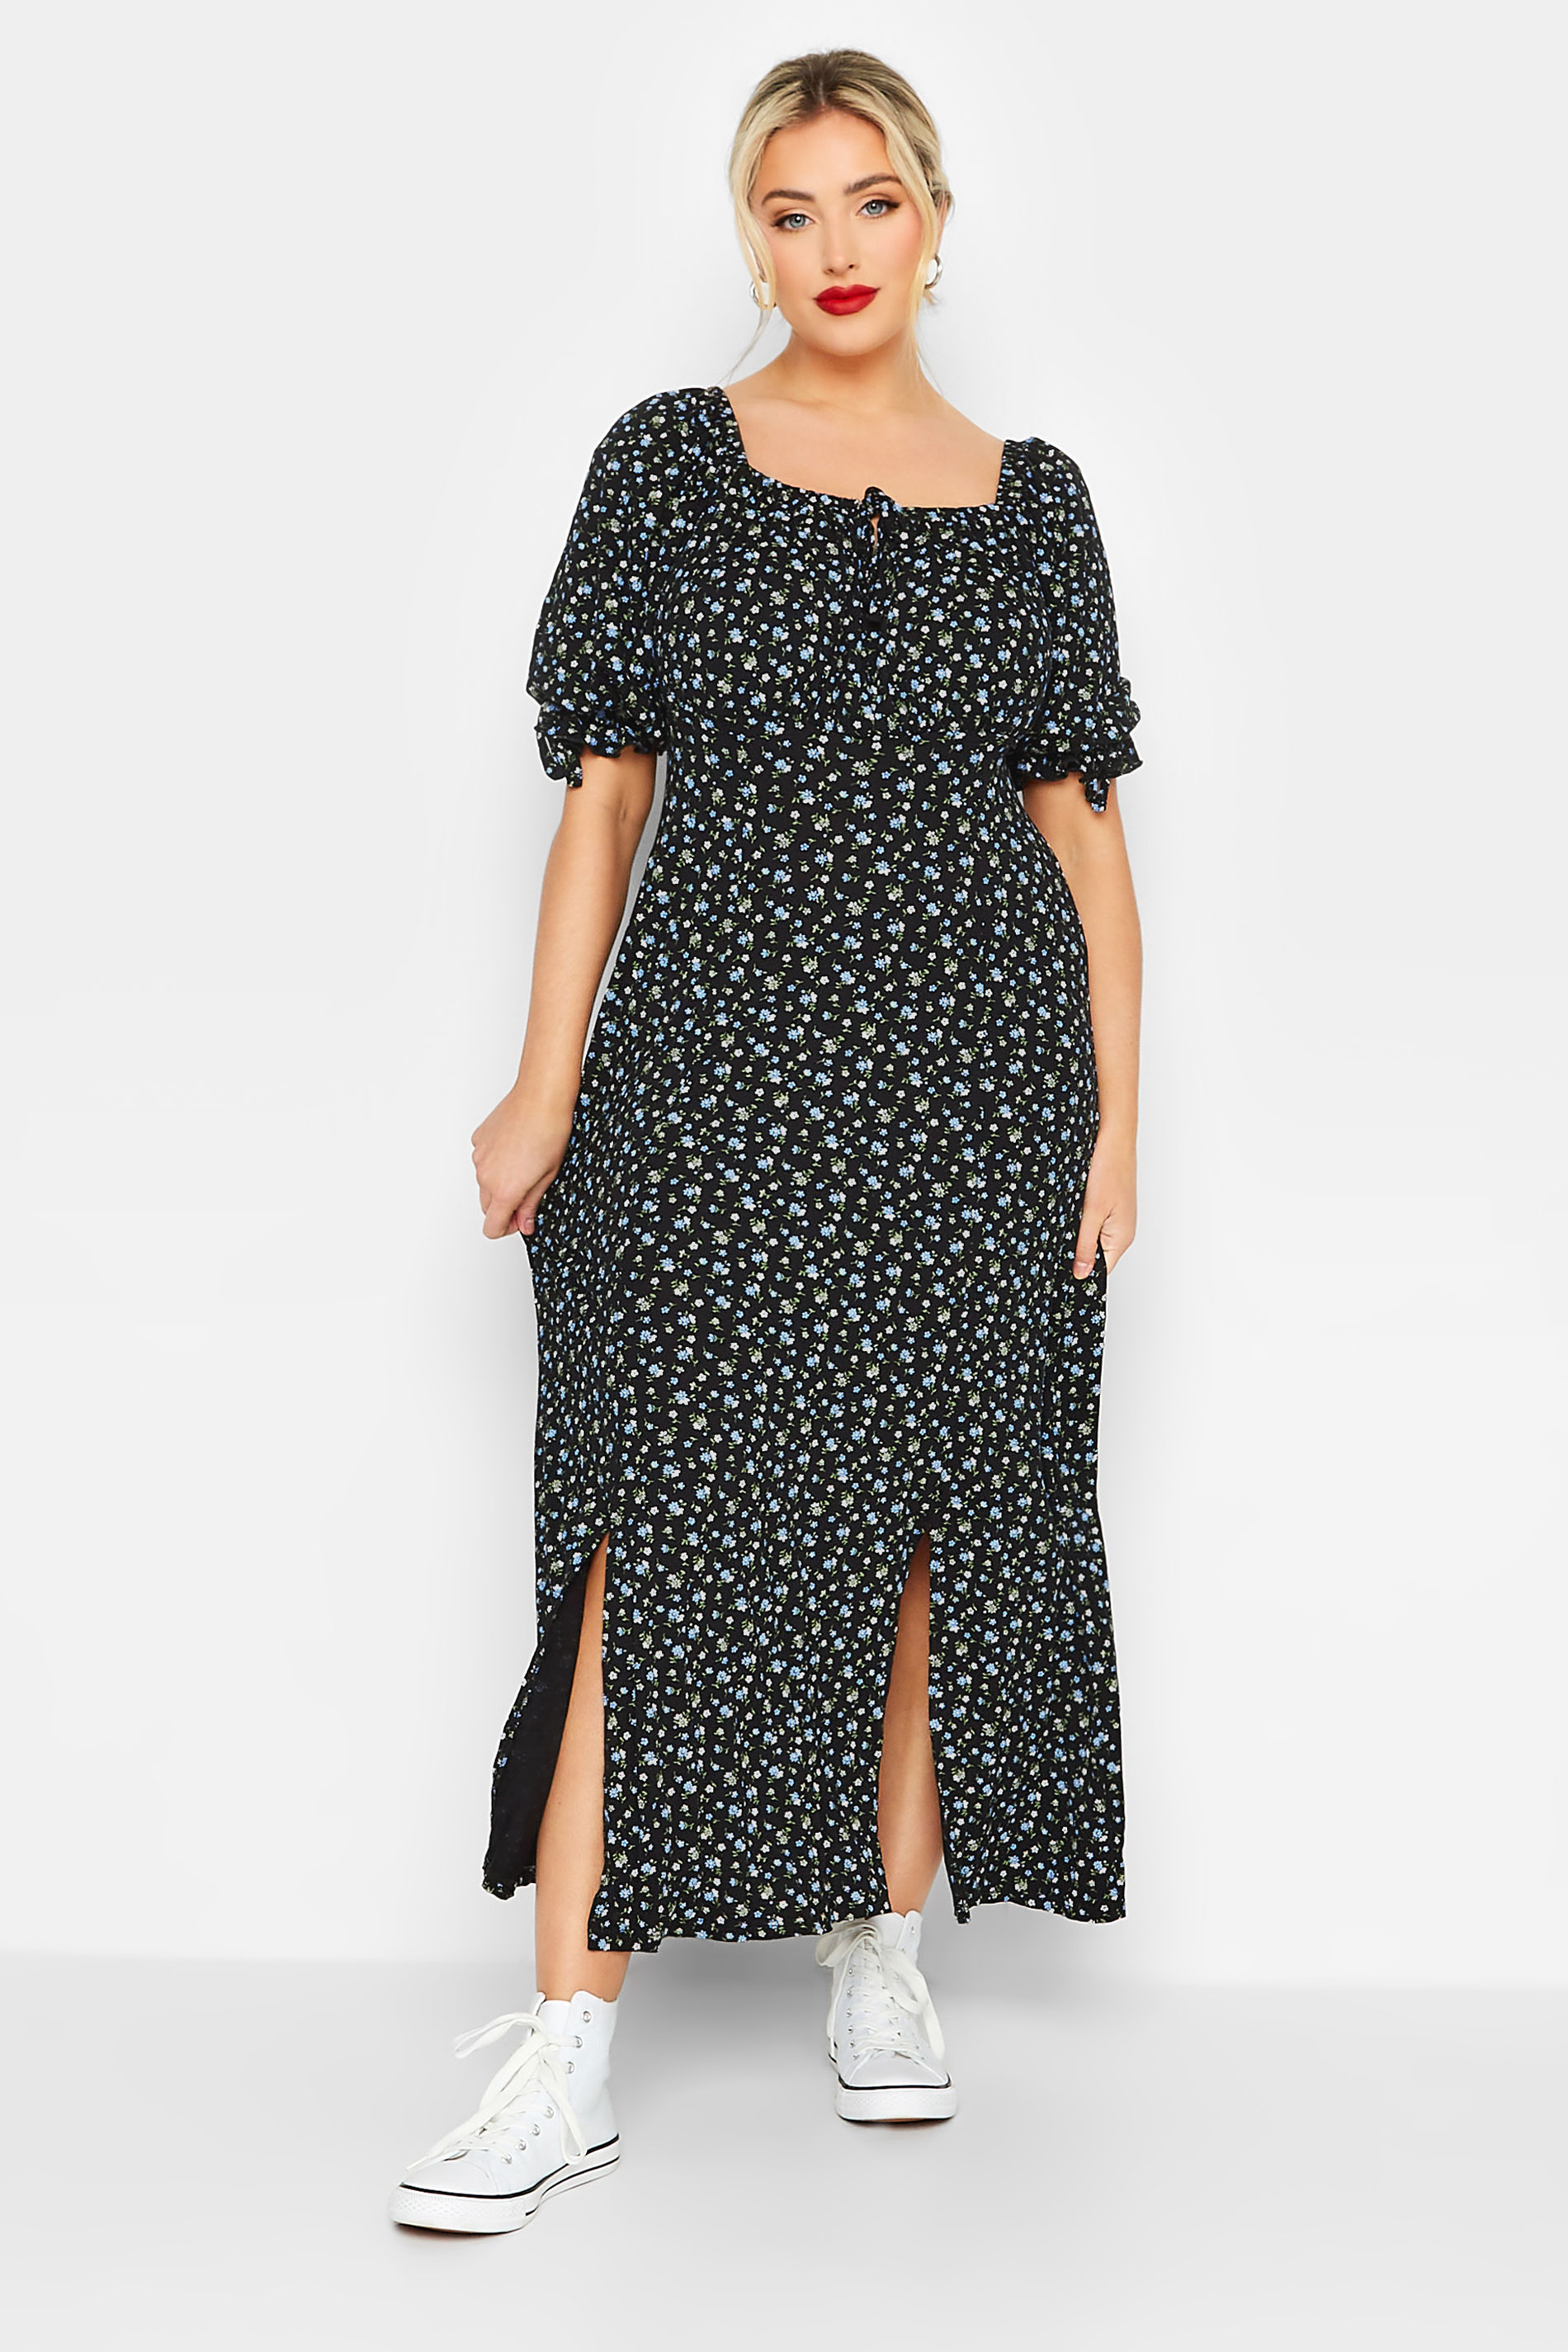 LIMITED COLLECTION Plus Size Black Floral Milkmaid Side Split Maxi Dress | Yours Clothing  2